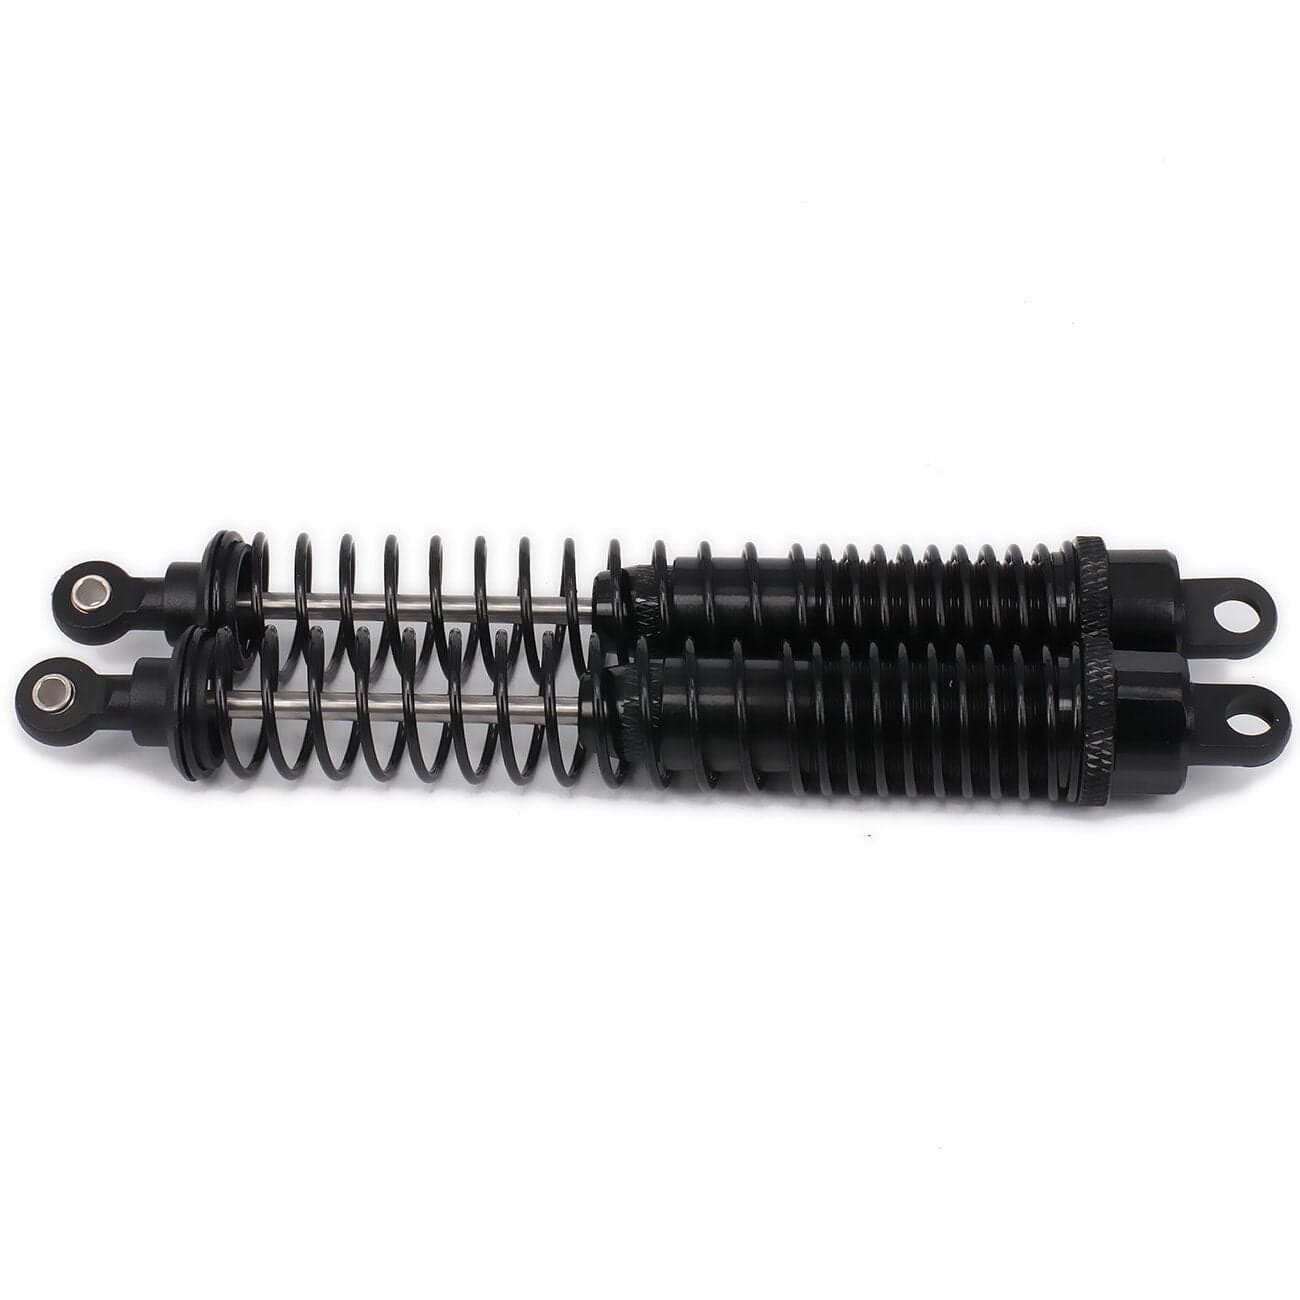 RCAWD RC CAR UPGRADE PARTS Black RCAWD Adjustable 130mm RC Shock Absorber Damper For RC Car 1/10 Model Car 2PCS